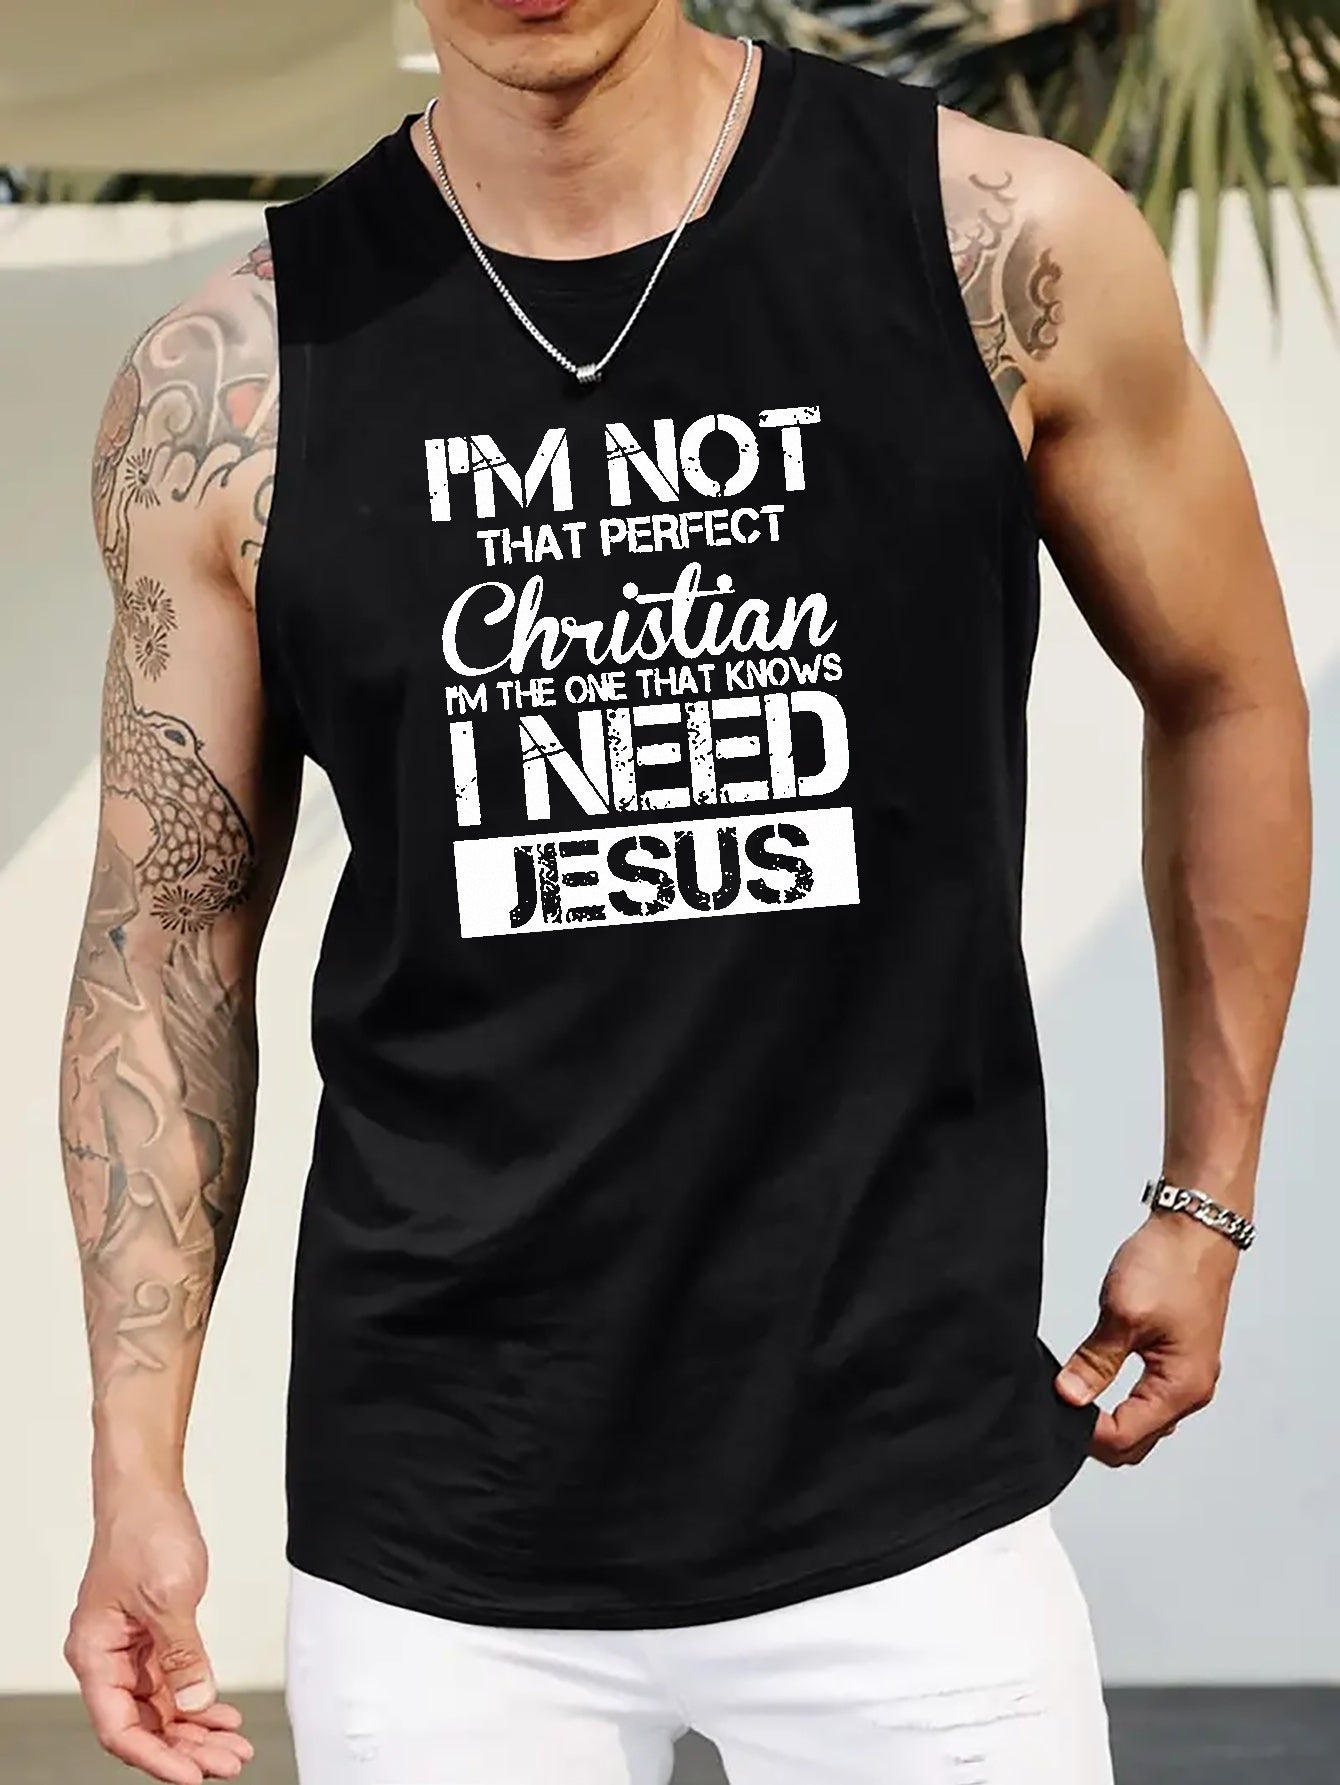 I'm Not That Perfect Christian...I Need Jesus Plus Size Men's Christian Tank Top claimedbygoddesigns